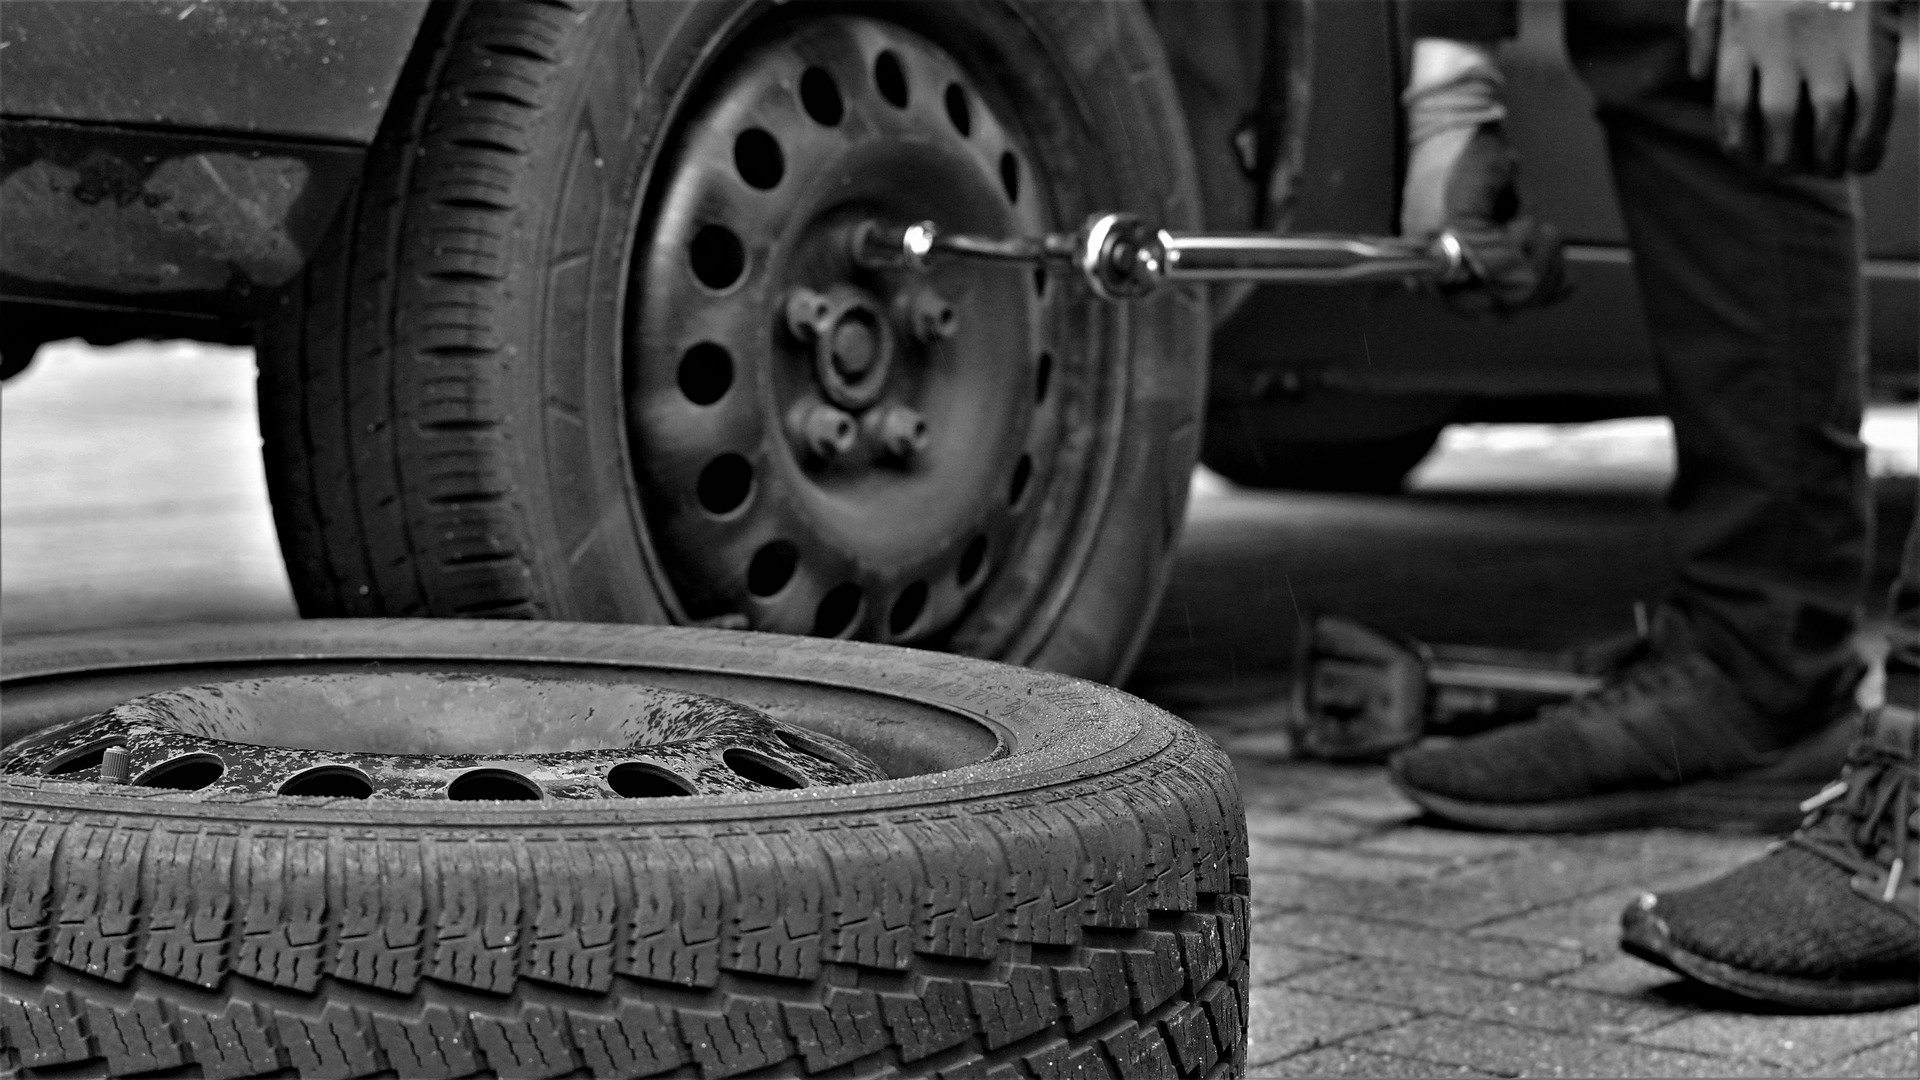 Gavin Fleet care Bedford tyre fitting services